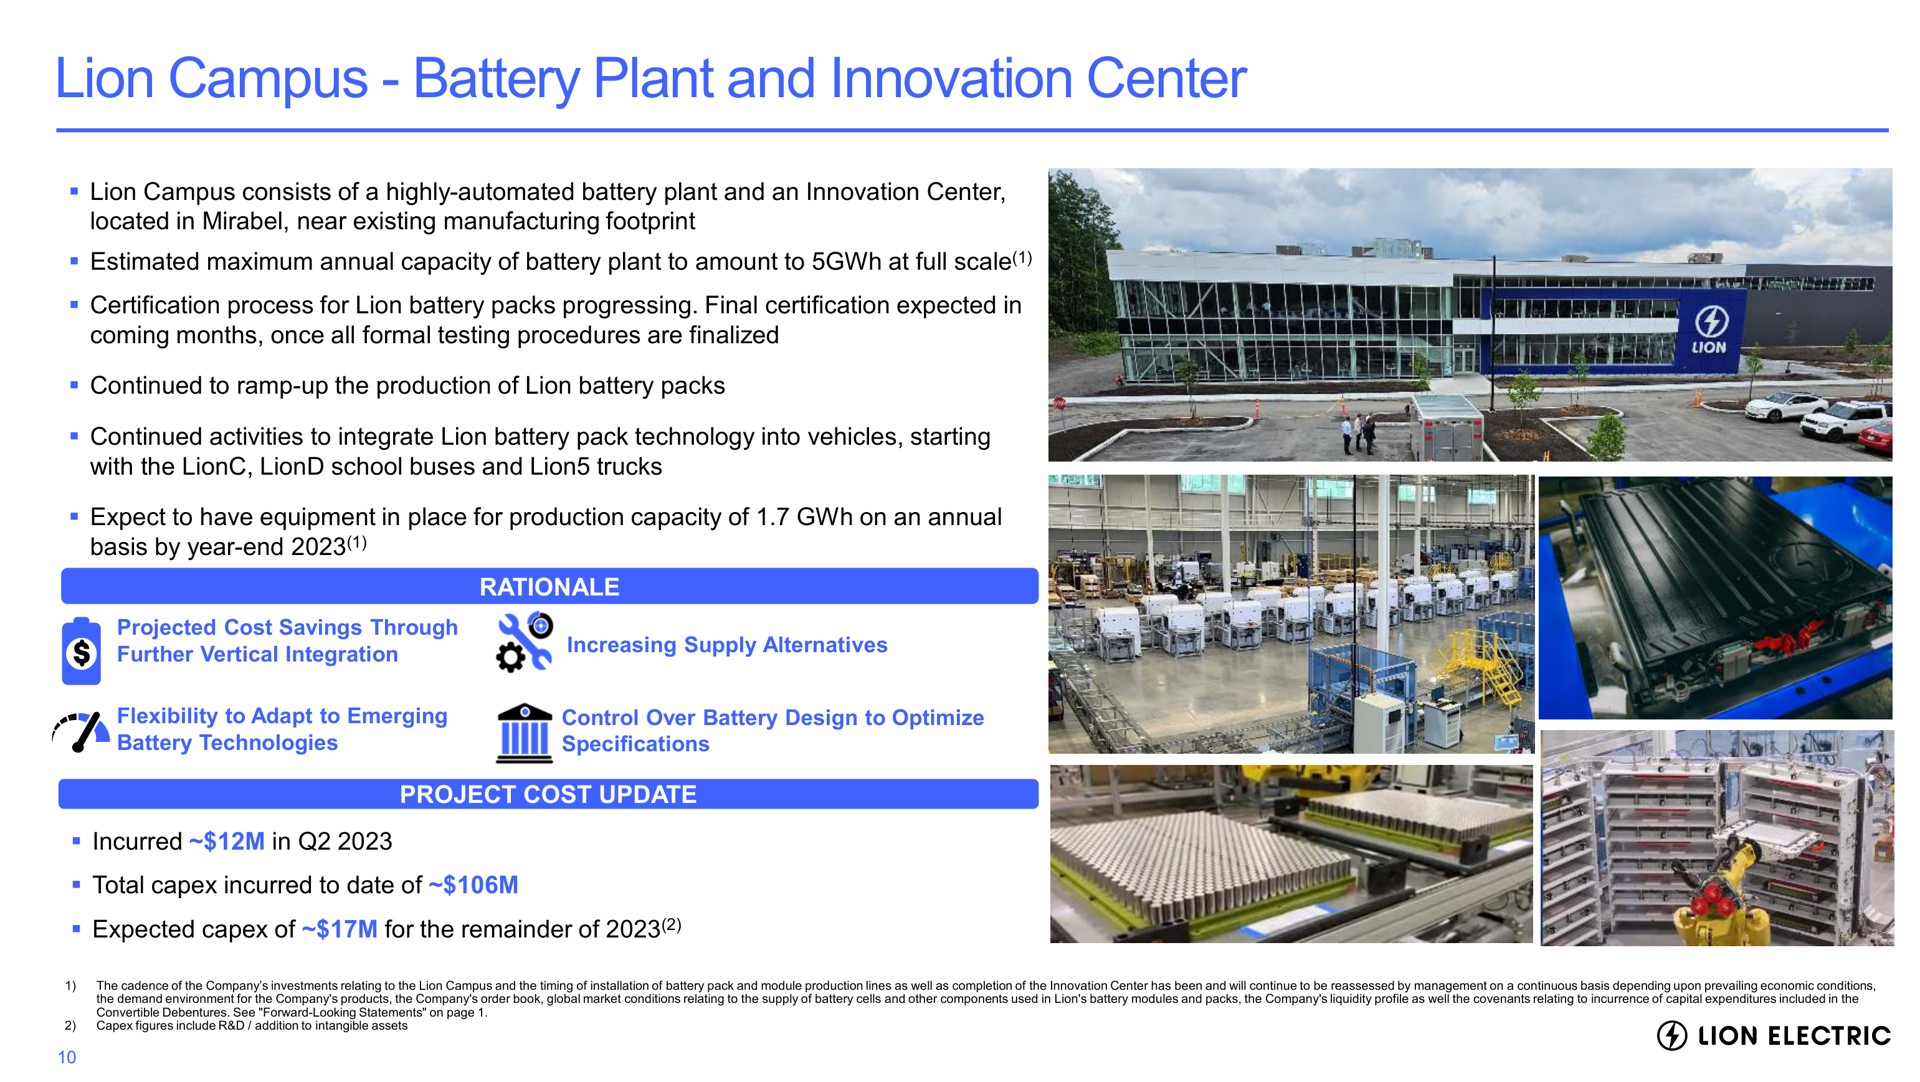 lion campus battery plant and innovation center | Lion Electric